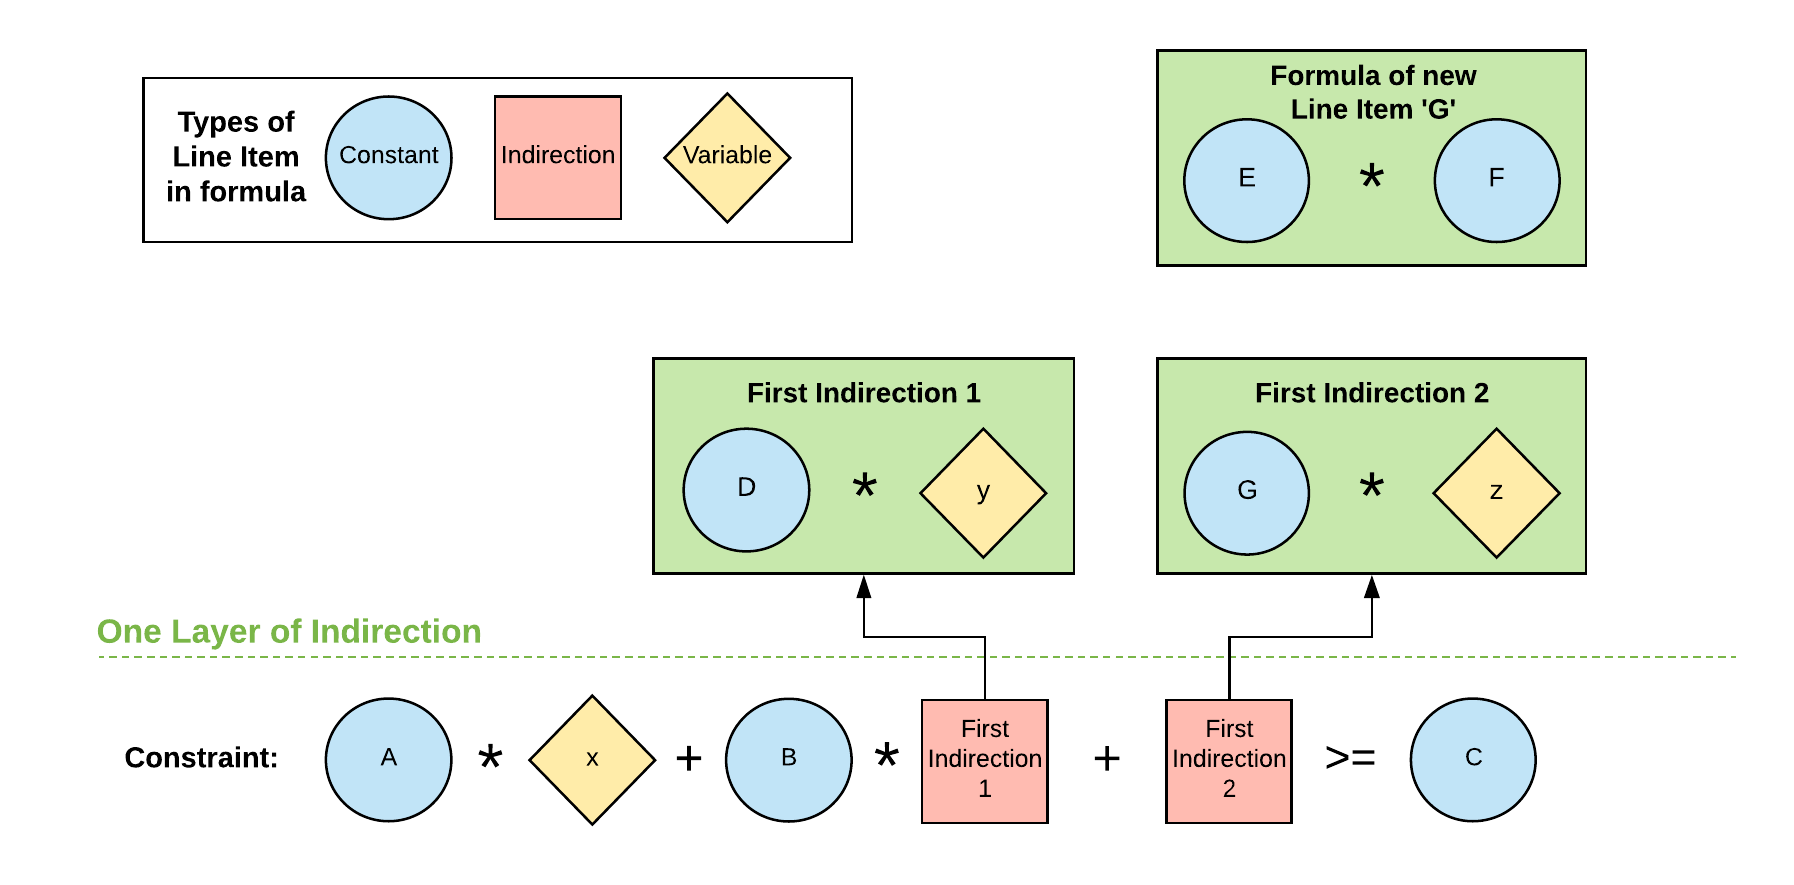 A revised version of the earlier chart. All elements that previously interacted with the variable with two levels of indirection are now part of a formula in a new line item. This new line item has been combined directly with the variable, thereby avoiding the second level of indirection. 